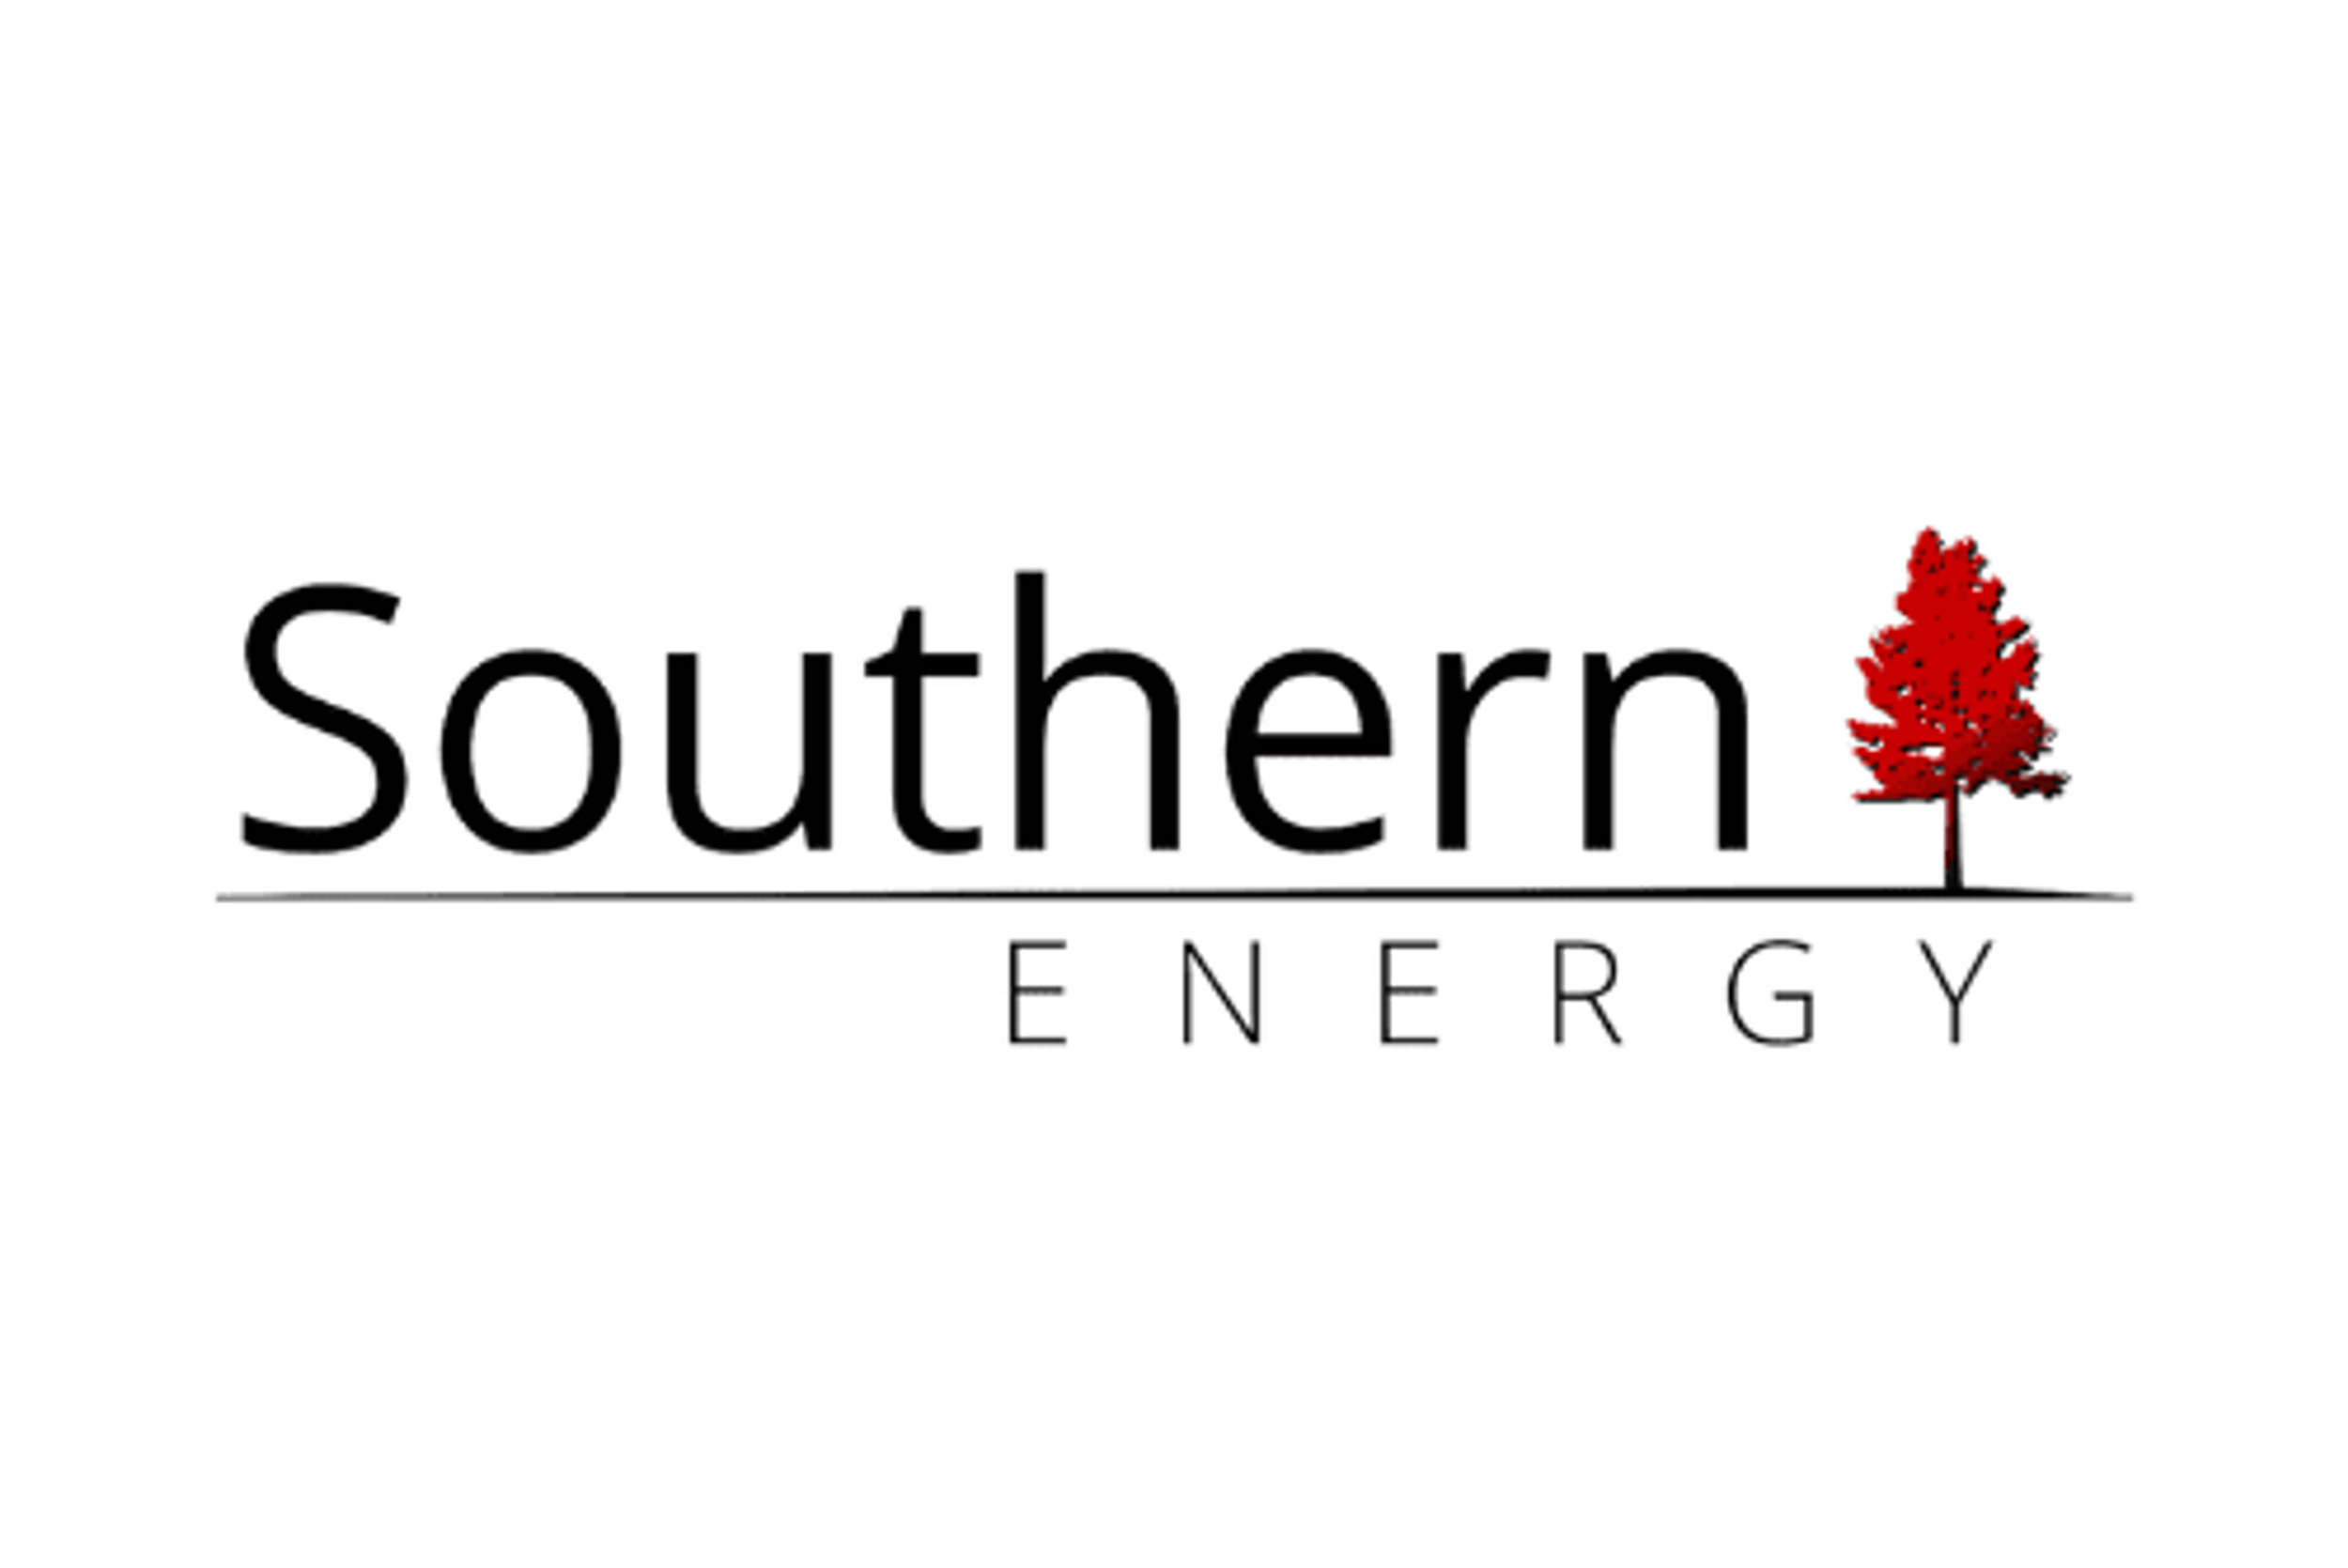 Southern Energy Corp. Announces Exercise of Warrants and Director Share Purchase